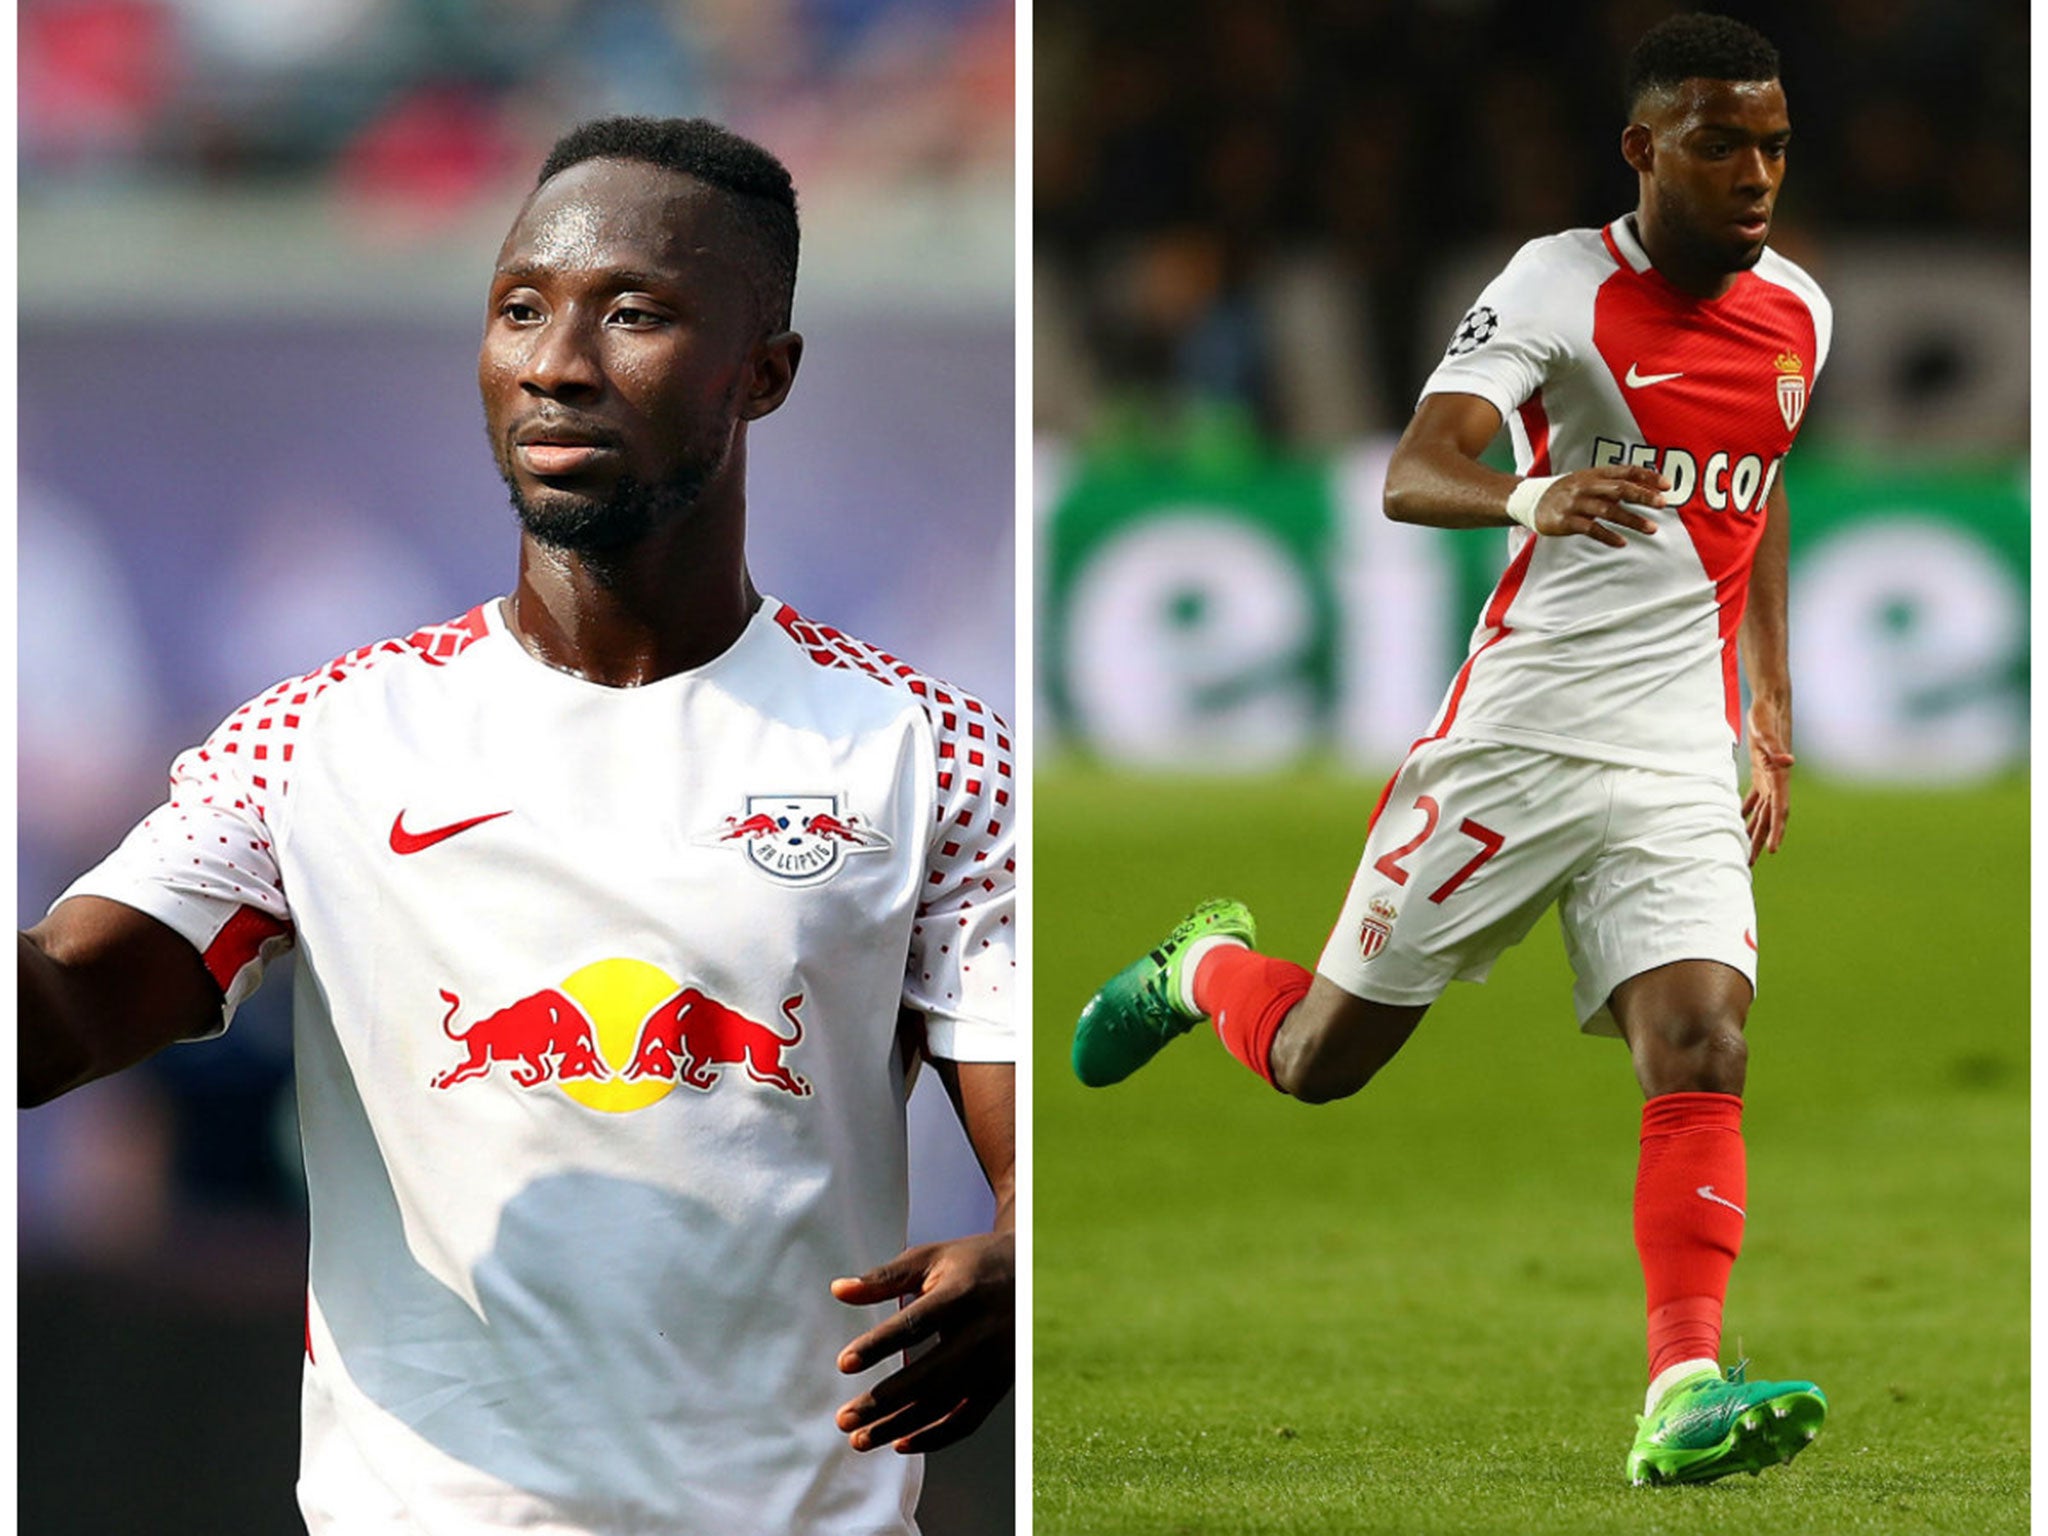 Naby Keita has signed for Liverpool while Thomas Lemar has been linked to the club this summer